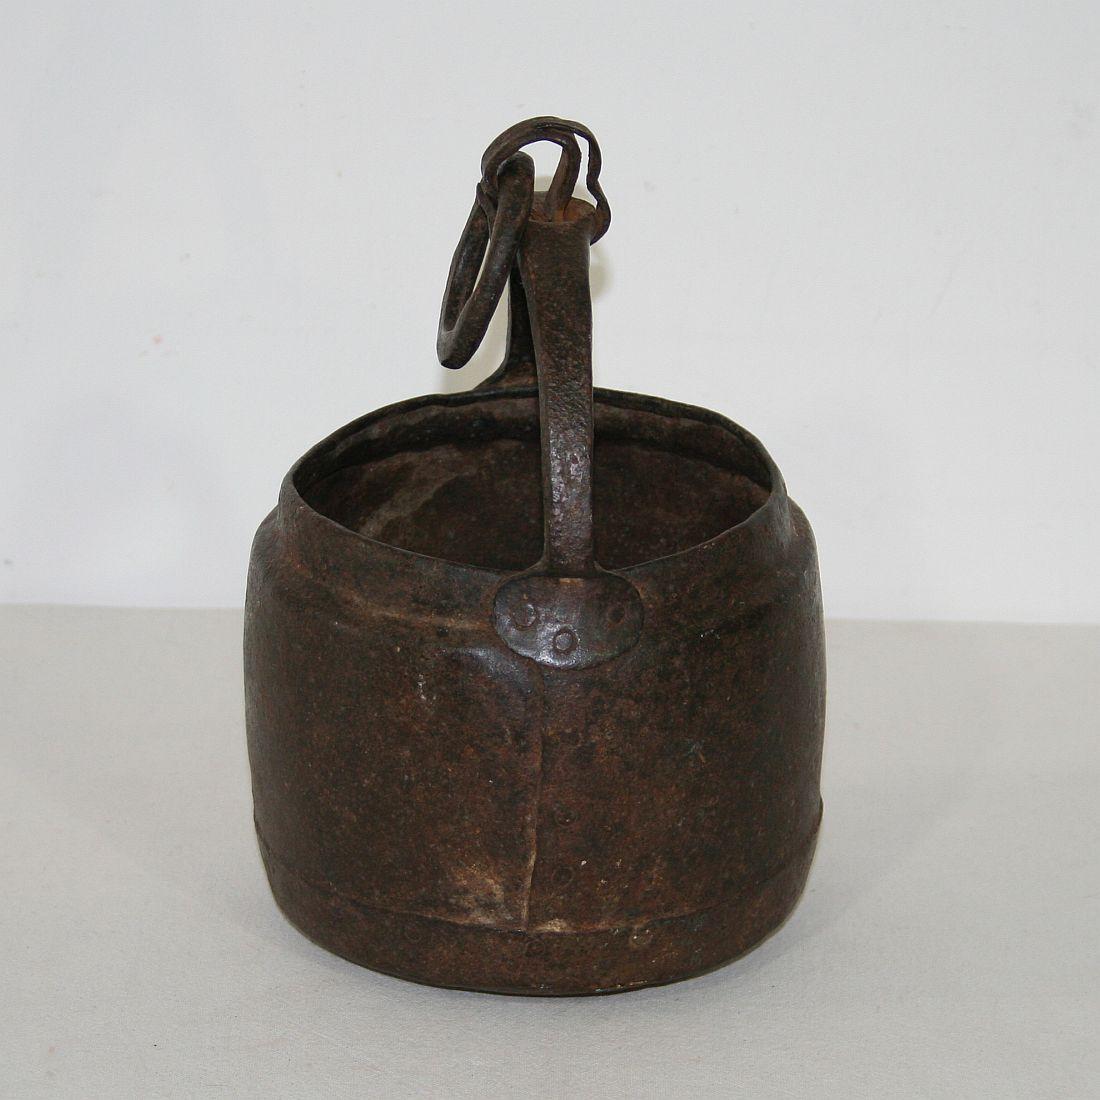 Folk Art Primitive 18th Century Hand Forged Iron Cooking Pot